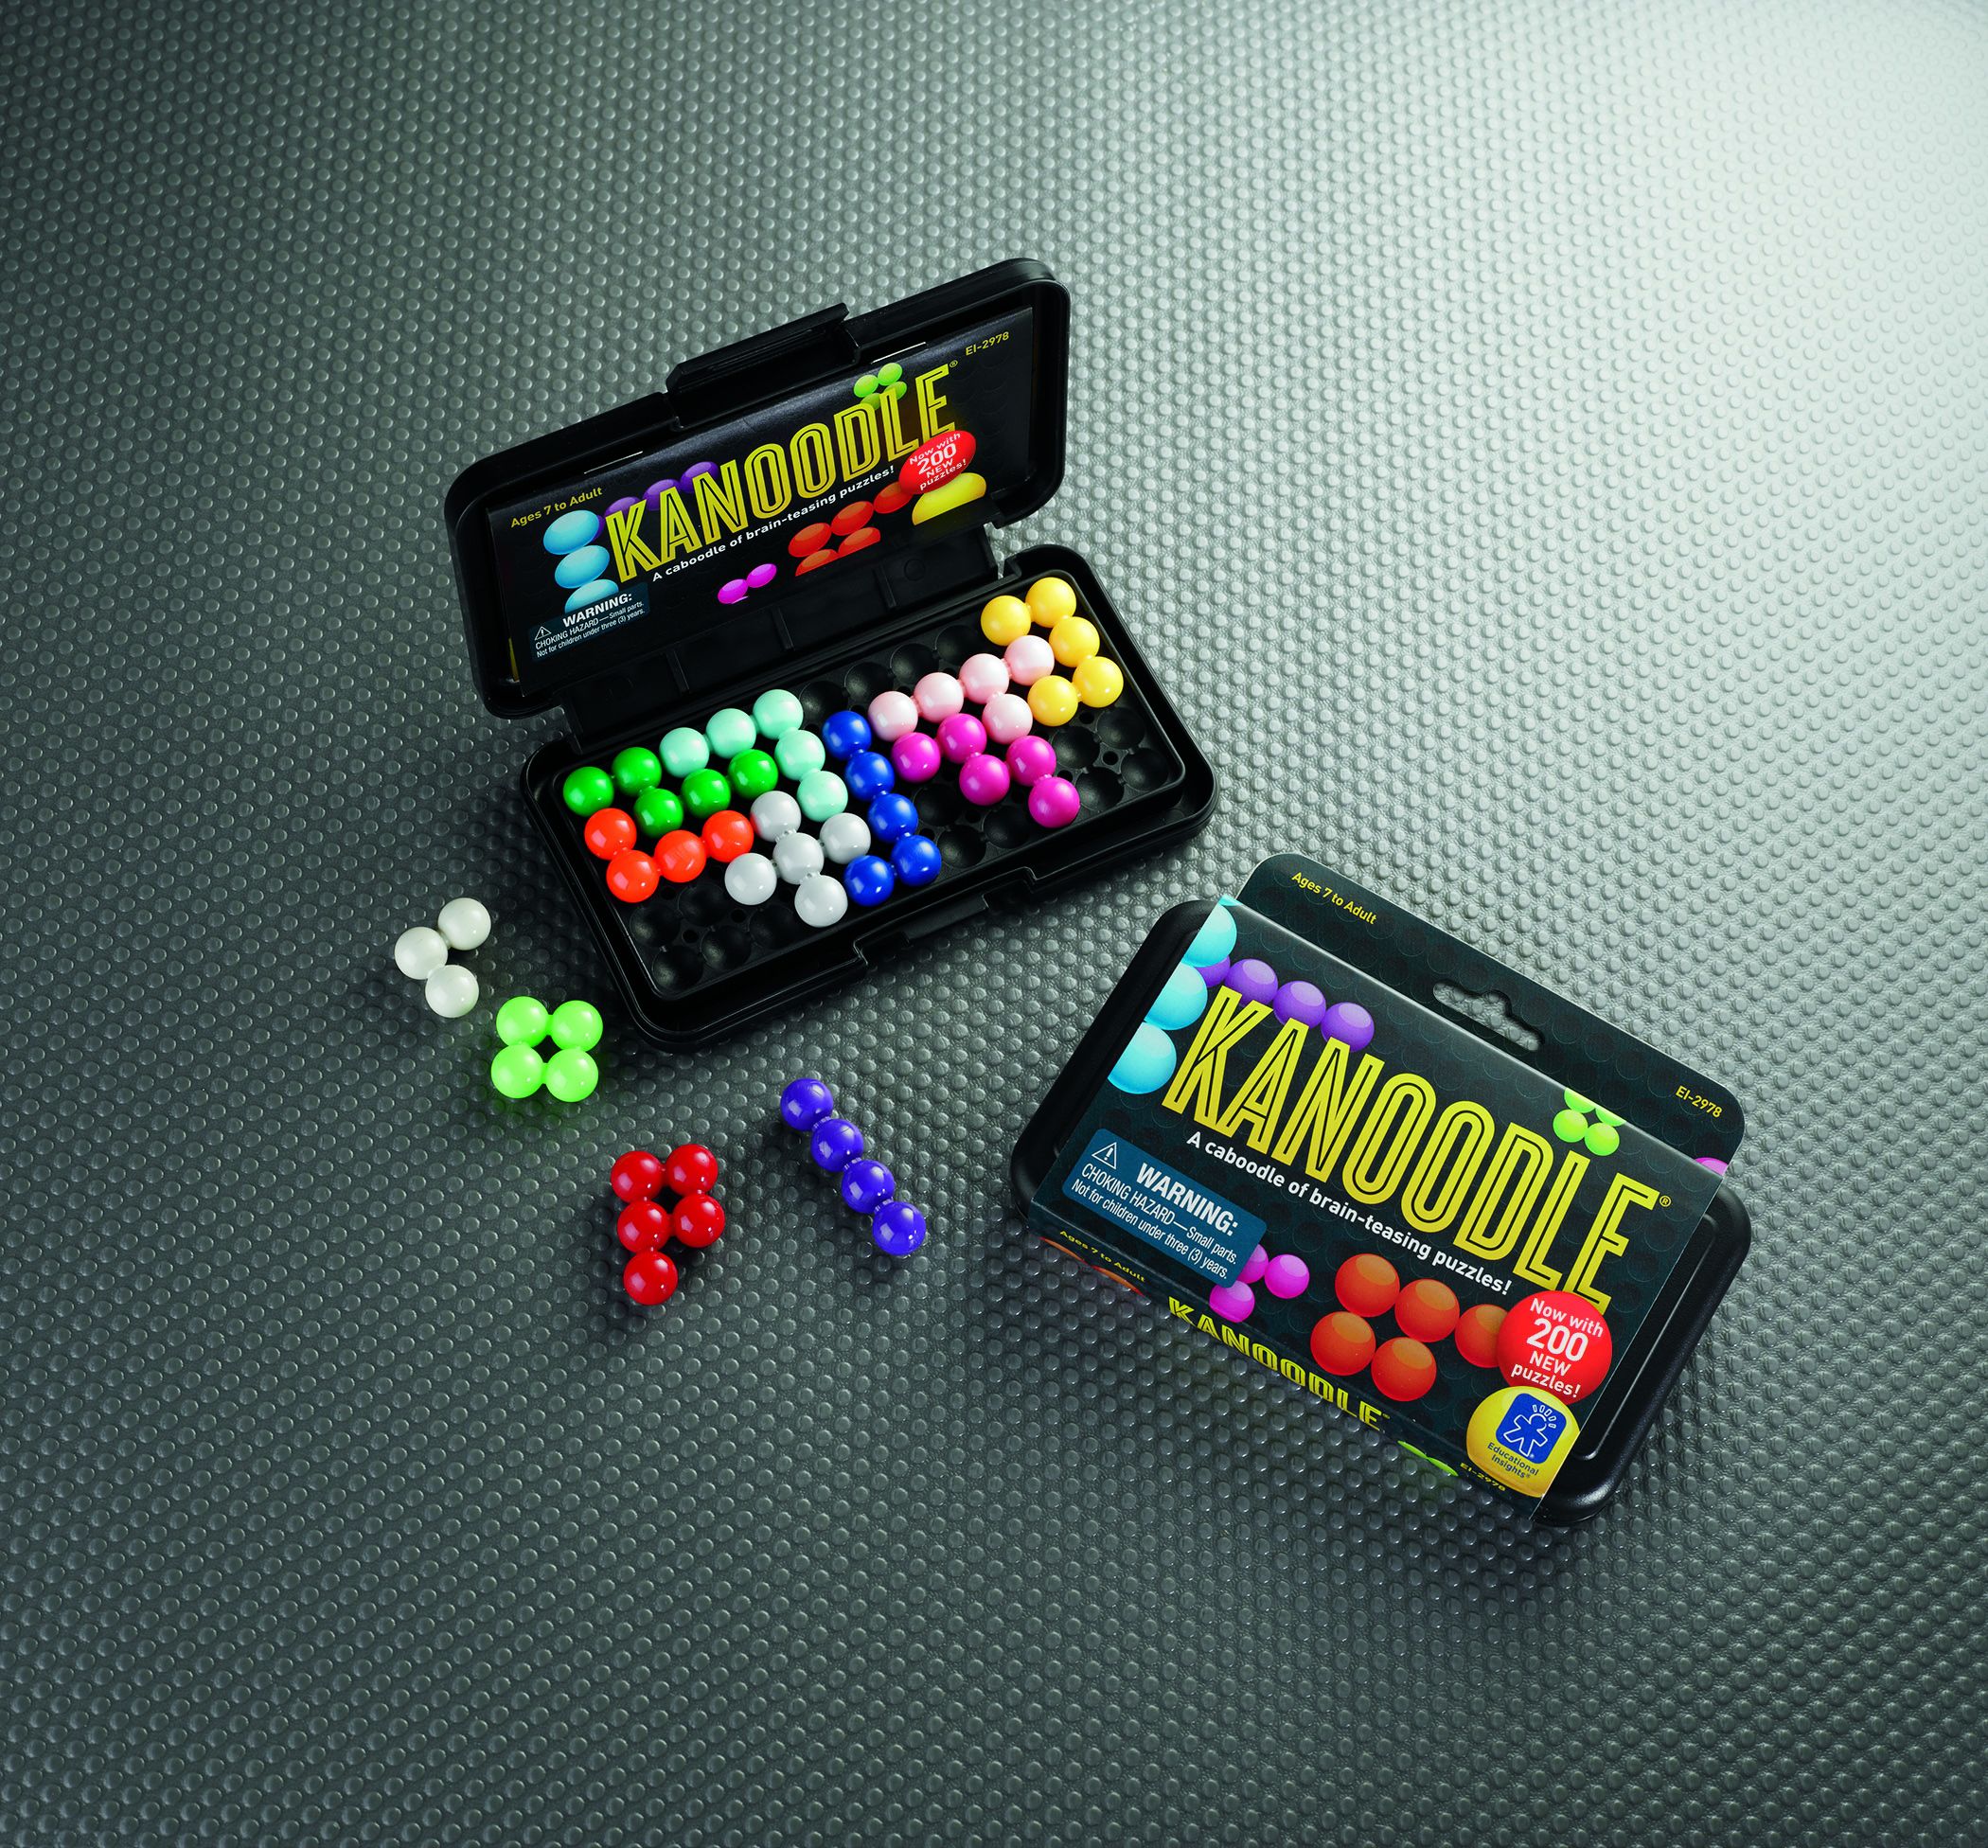 Kanoodle – Imaginuity Play with a Purpose